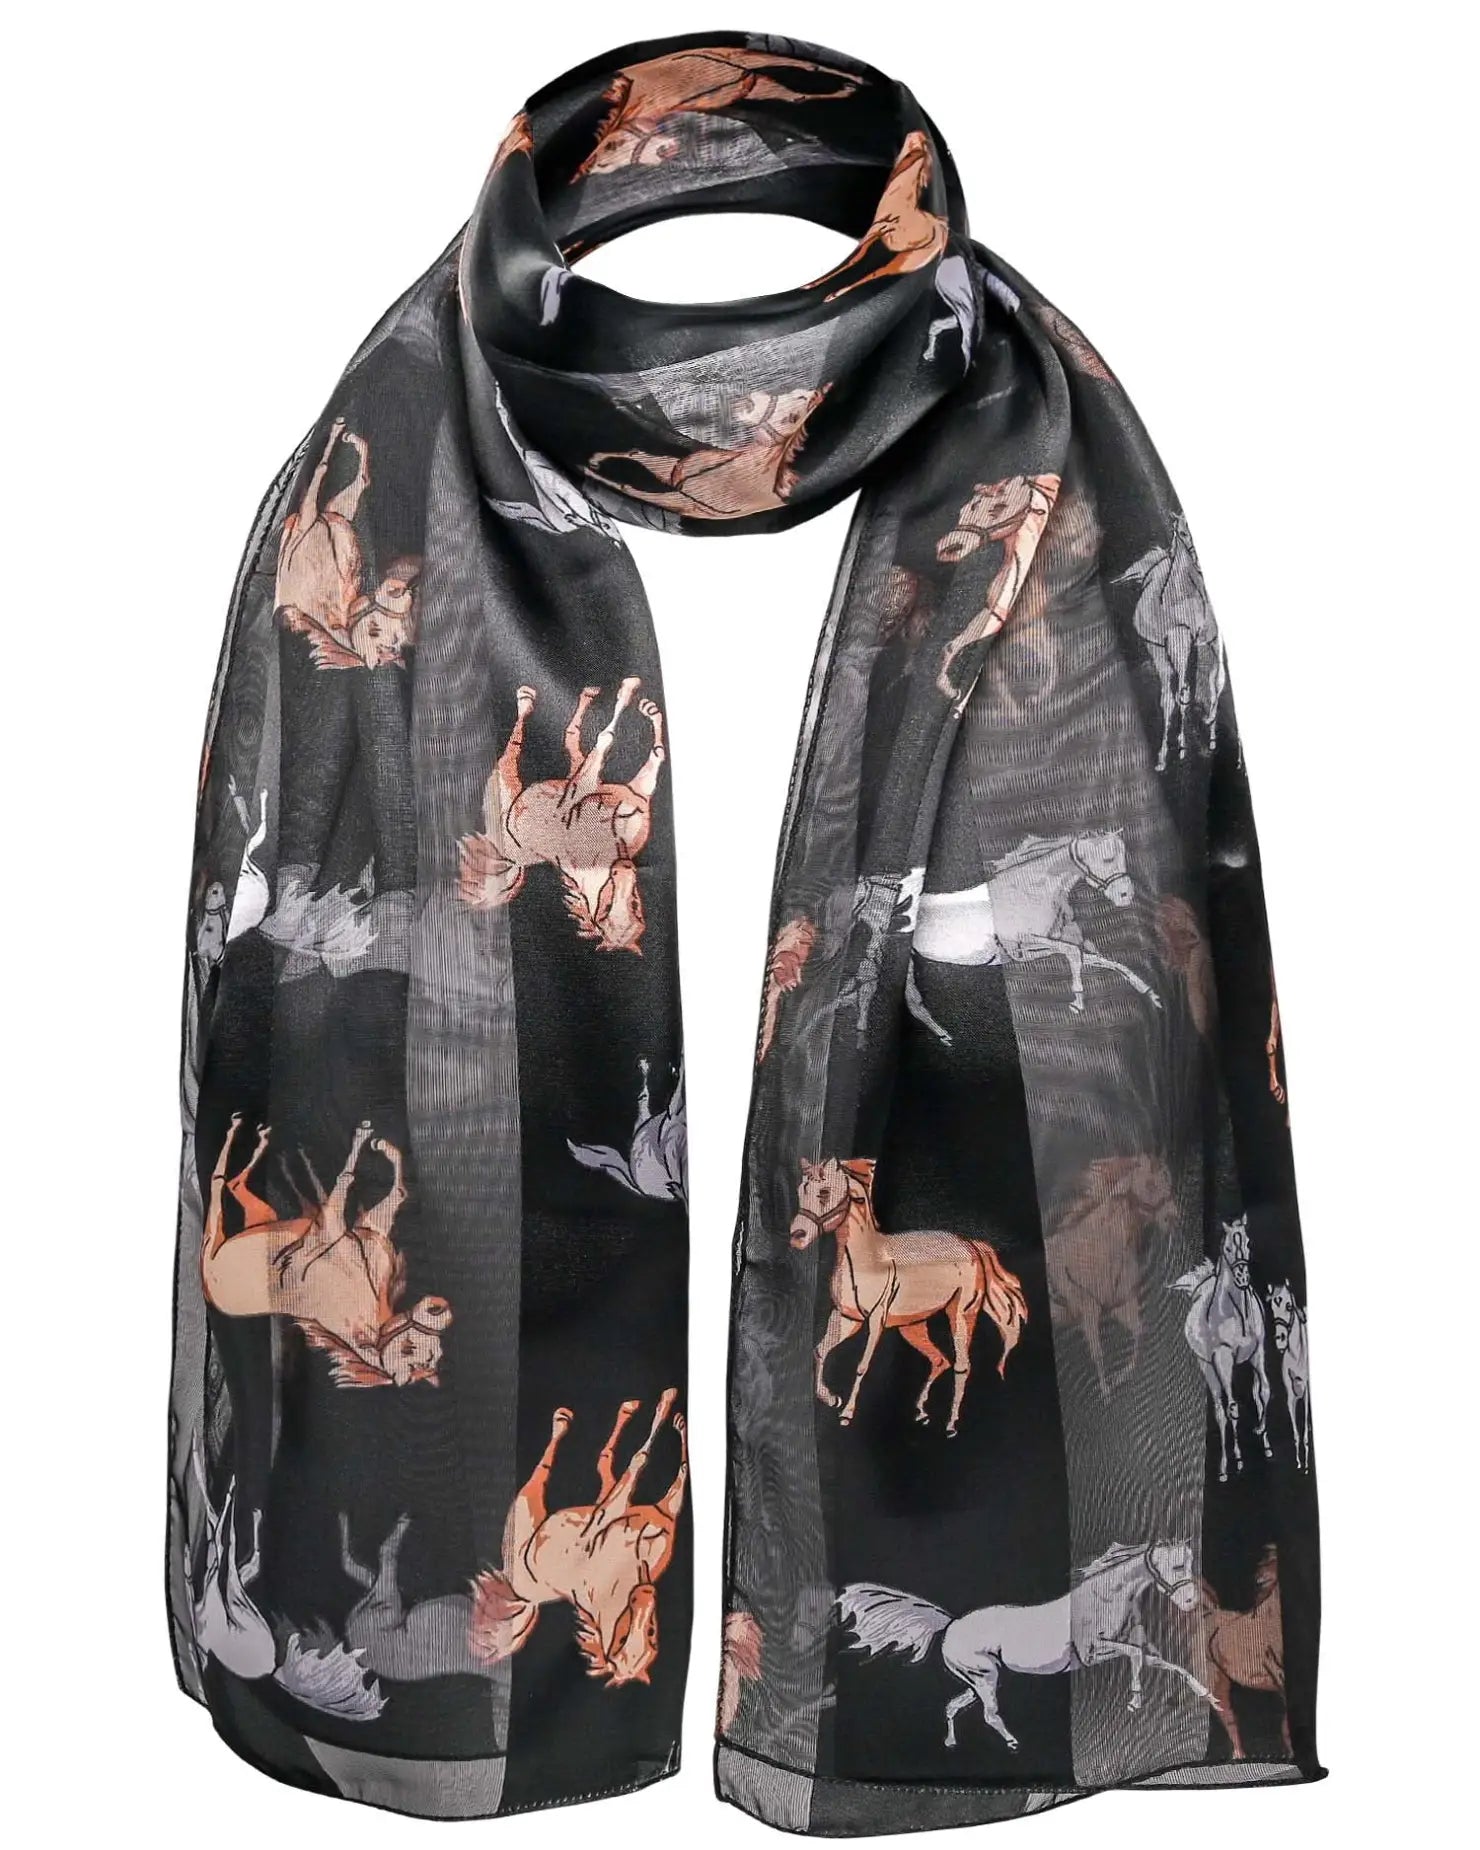 Elegant Equestrian Satin Silky Scarf with Horses Pattern